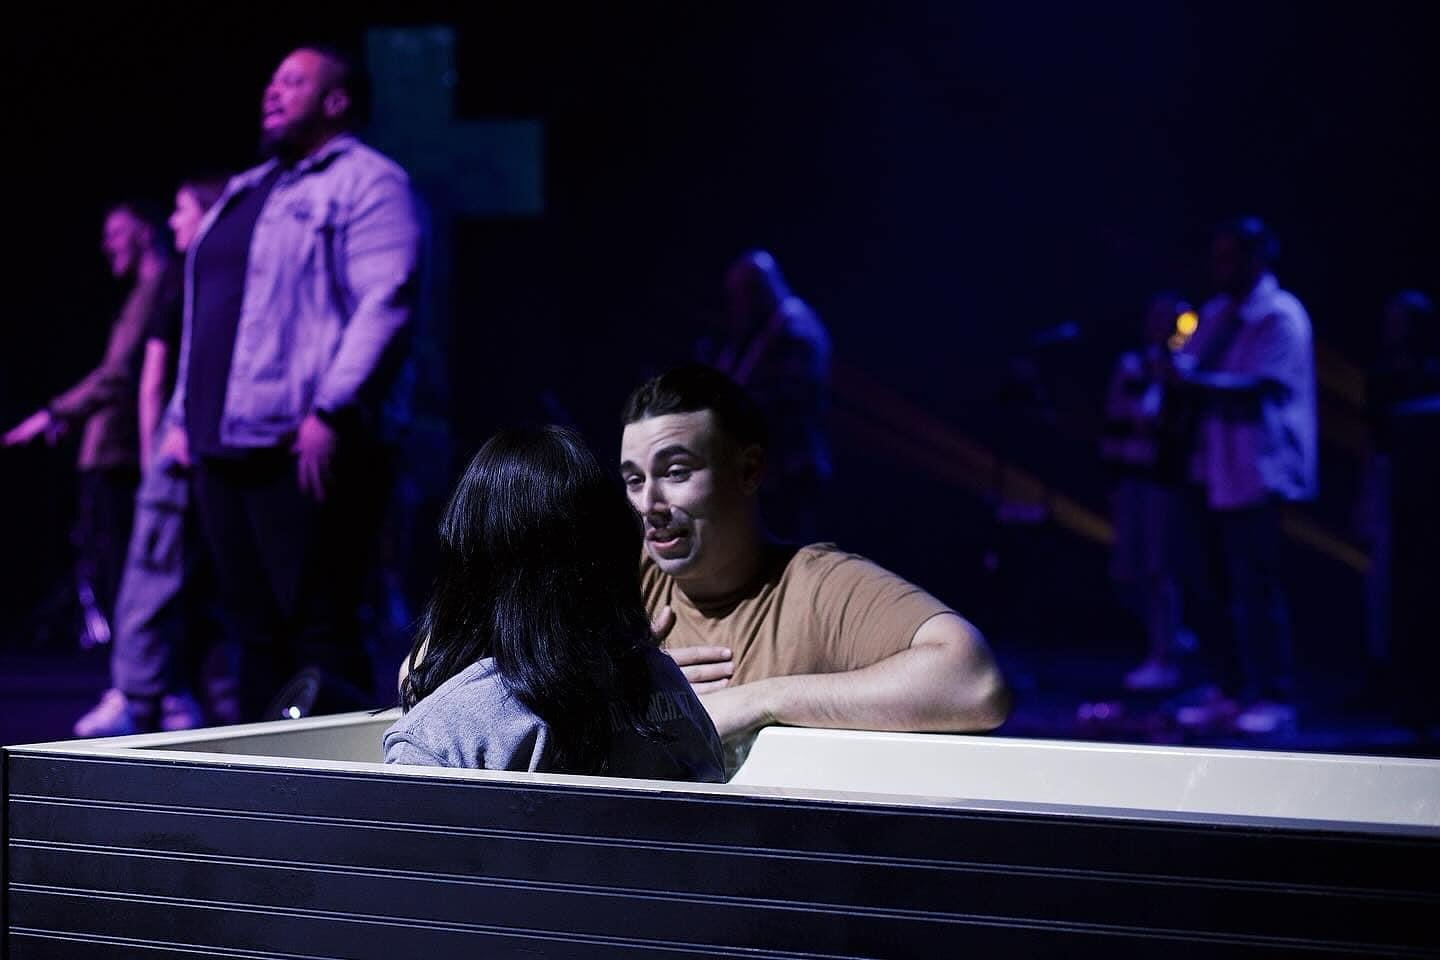 Take the next step in your faith, and get water baptized🙌🌊
Baptism Sunday is THIS SUNDAY.
Text the word BAPTISM to 251-319-4767 to register, or click the link in our bio.

http://knollwoodchurch.website/baptism